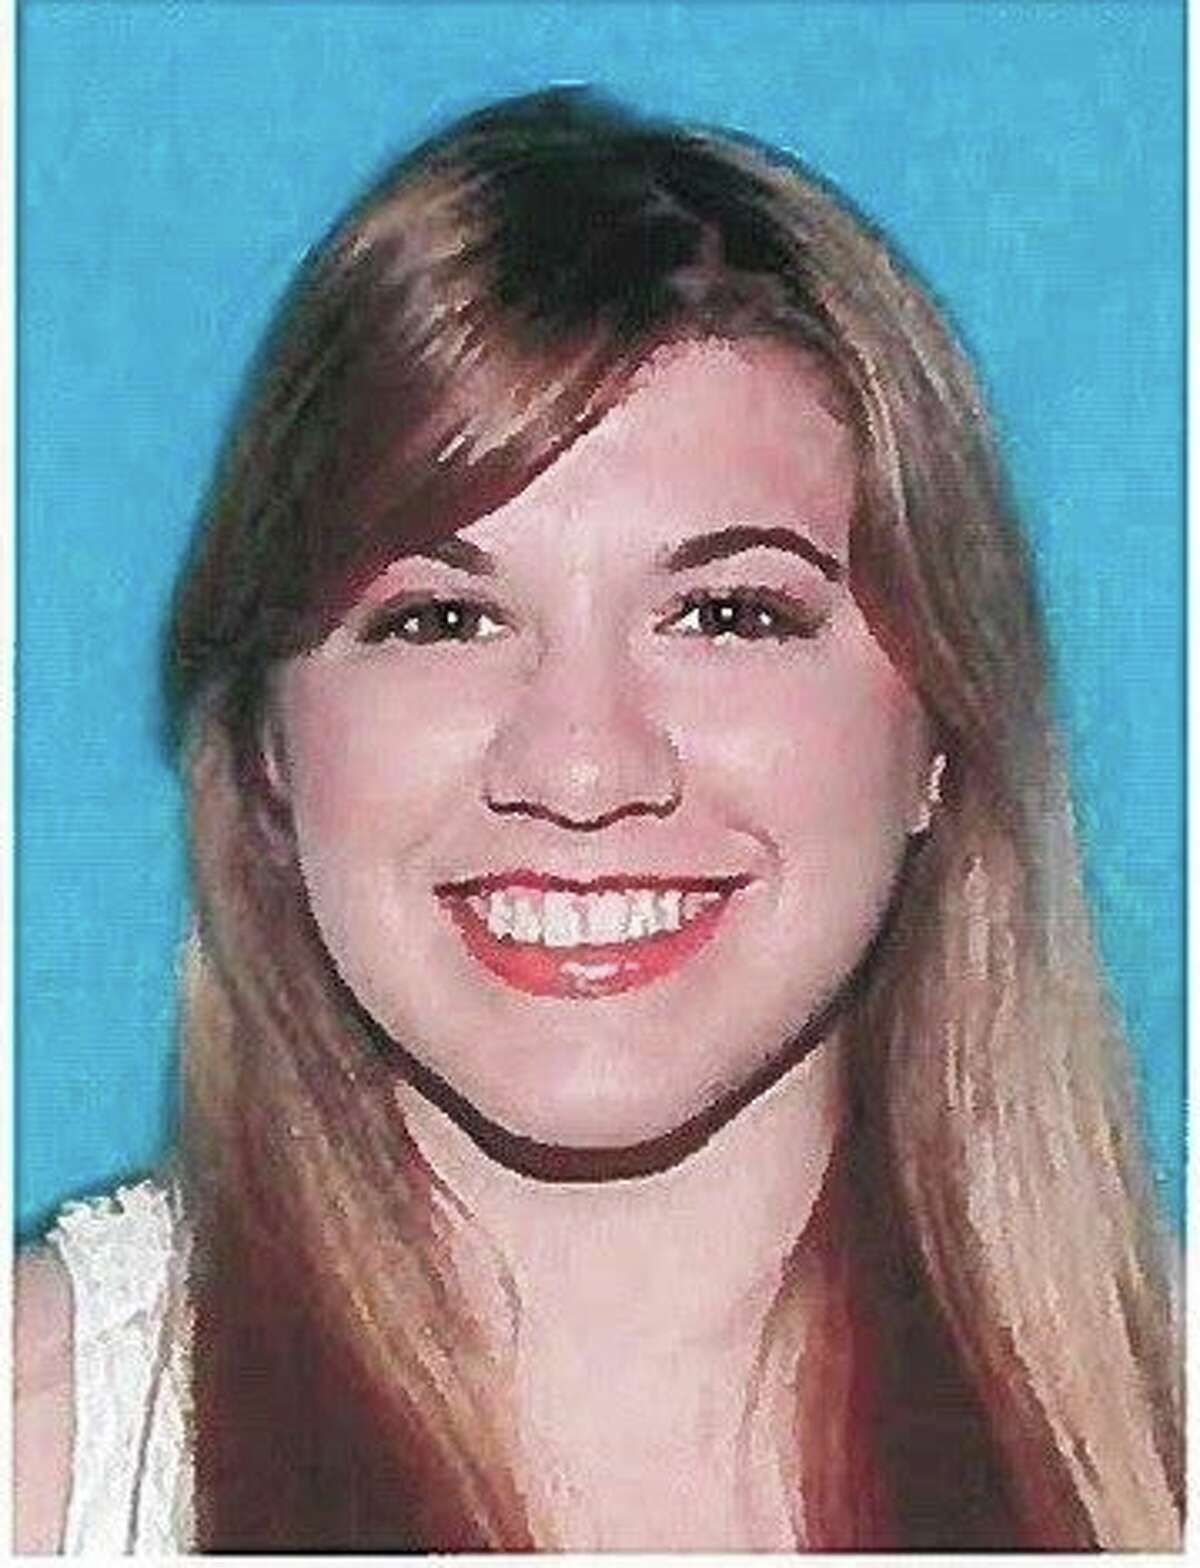 Kimberly Naquin, a 26-year-old geography teacher at Destrehan High School in St. Charles Parish, has been charged with carnal knowledge of a juvenile and prohibited sexual conduct between a student and educator. She is accused of having a sexual relationship with a female student.